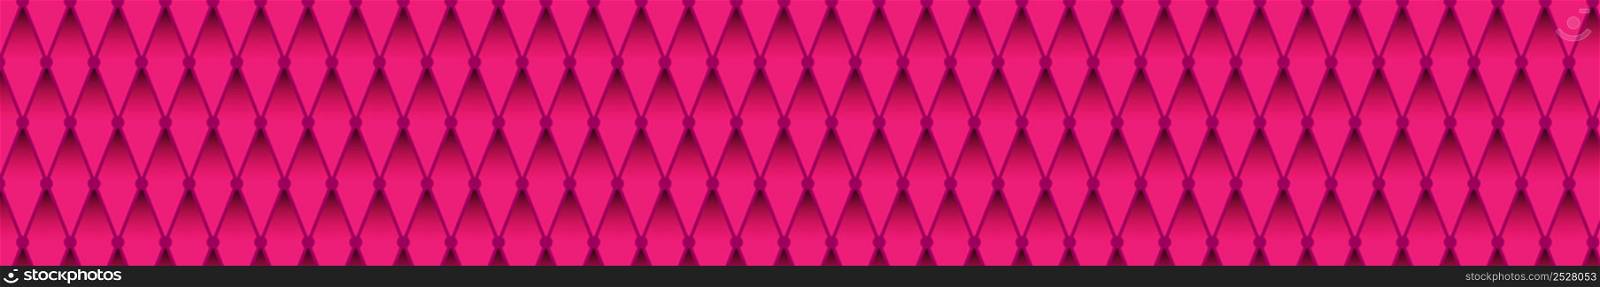 Pink background with diagonal lines forming a rhombus. Vector illustration for banners, textures, simple backgrounds and creative design